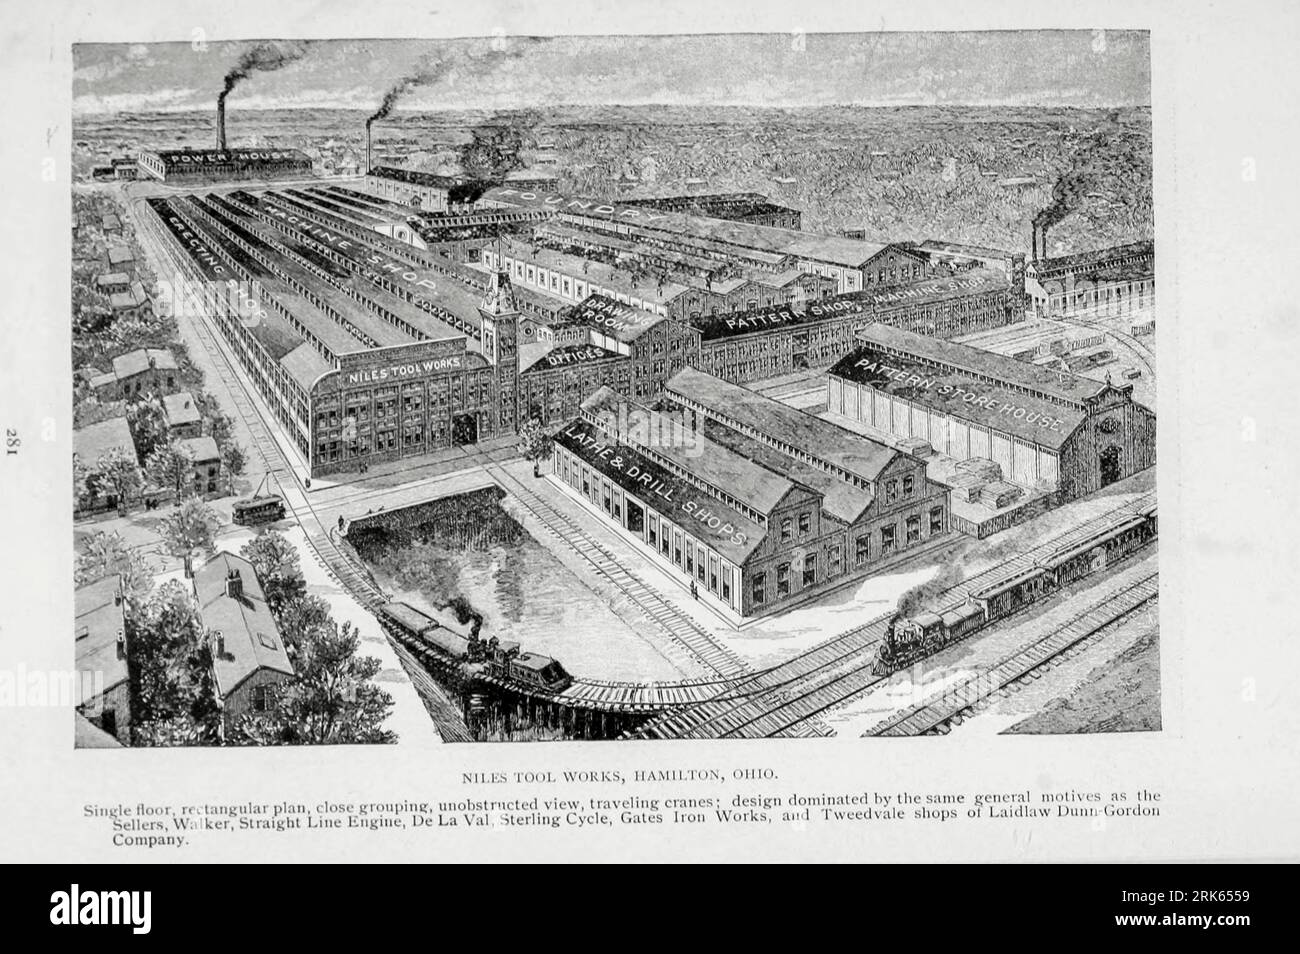 Niles Tool Works, Hamilton, Ohio Single Floor Rectangular plan, close grouping, unobstructed view from the Article MODERN MACHINE-SHOP ECONOMICS PRIME REQUISITES OF SHOP CONSTRUCTION By Horace L. Arnold from The Engineering Magazine DEVOTED TO INDUSTRIAL PROGRESS Volume XI October 1896 NEW YORK The Engineering Magazine Co Stock Photo